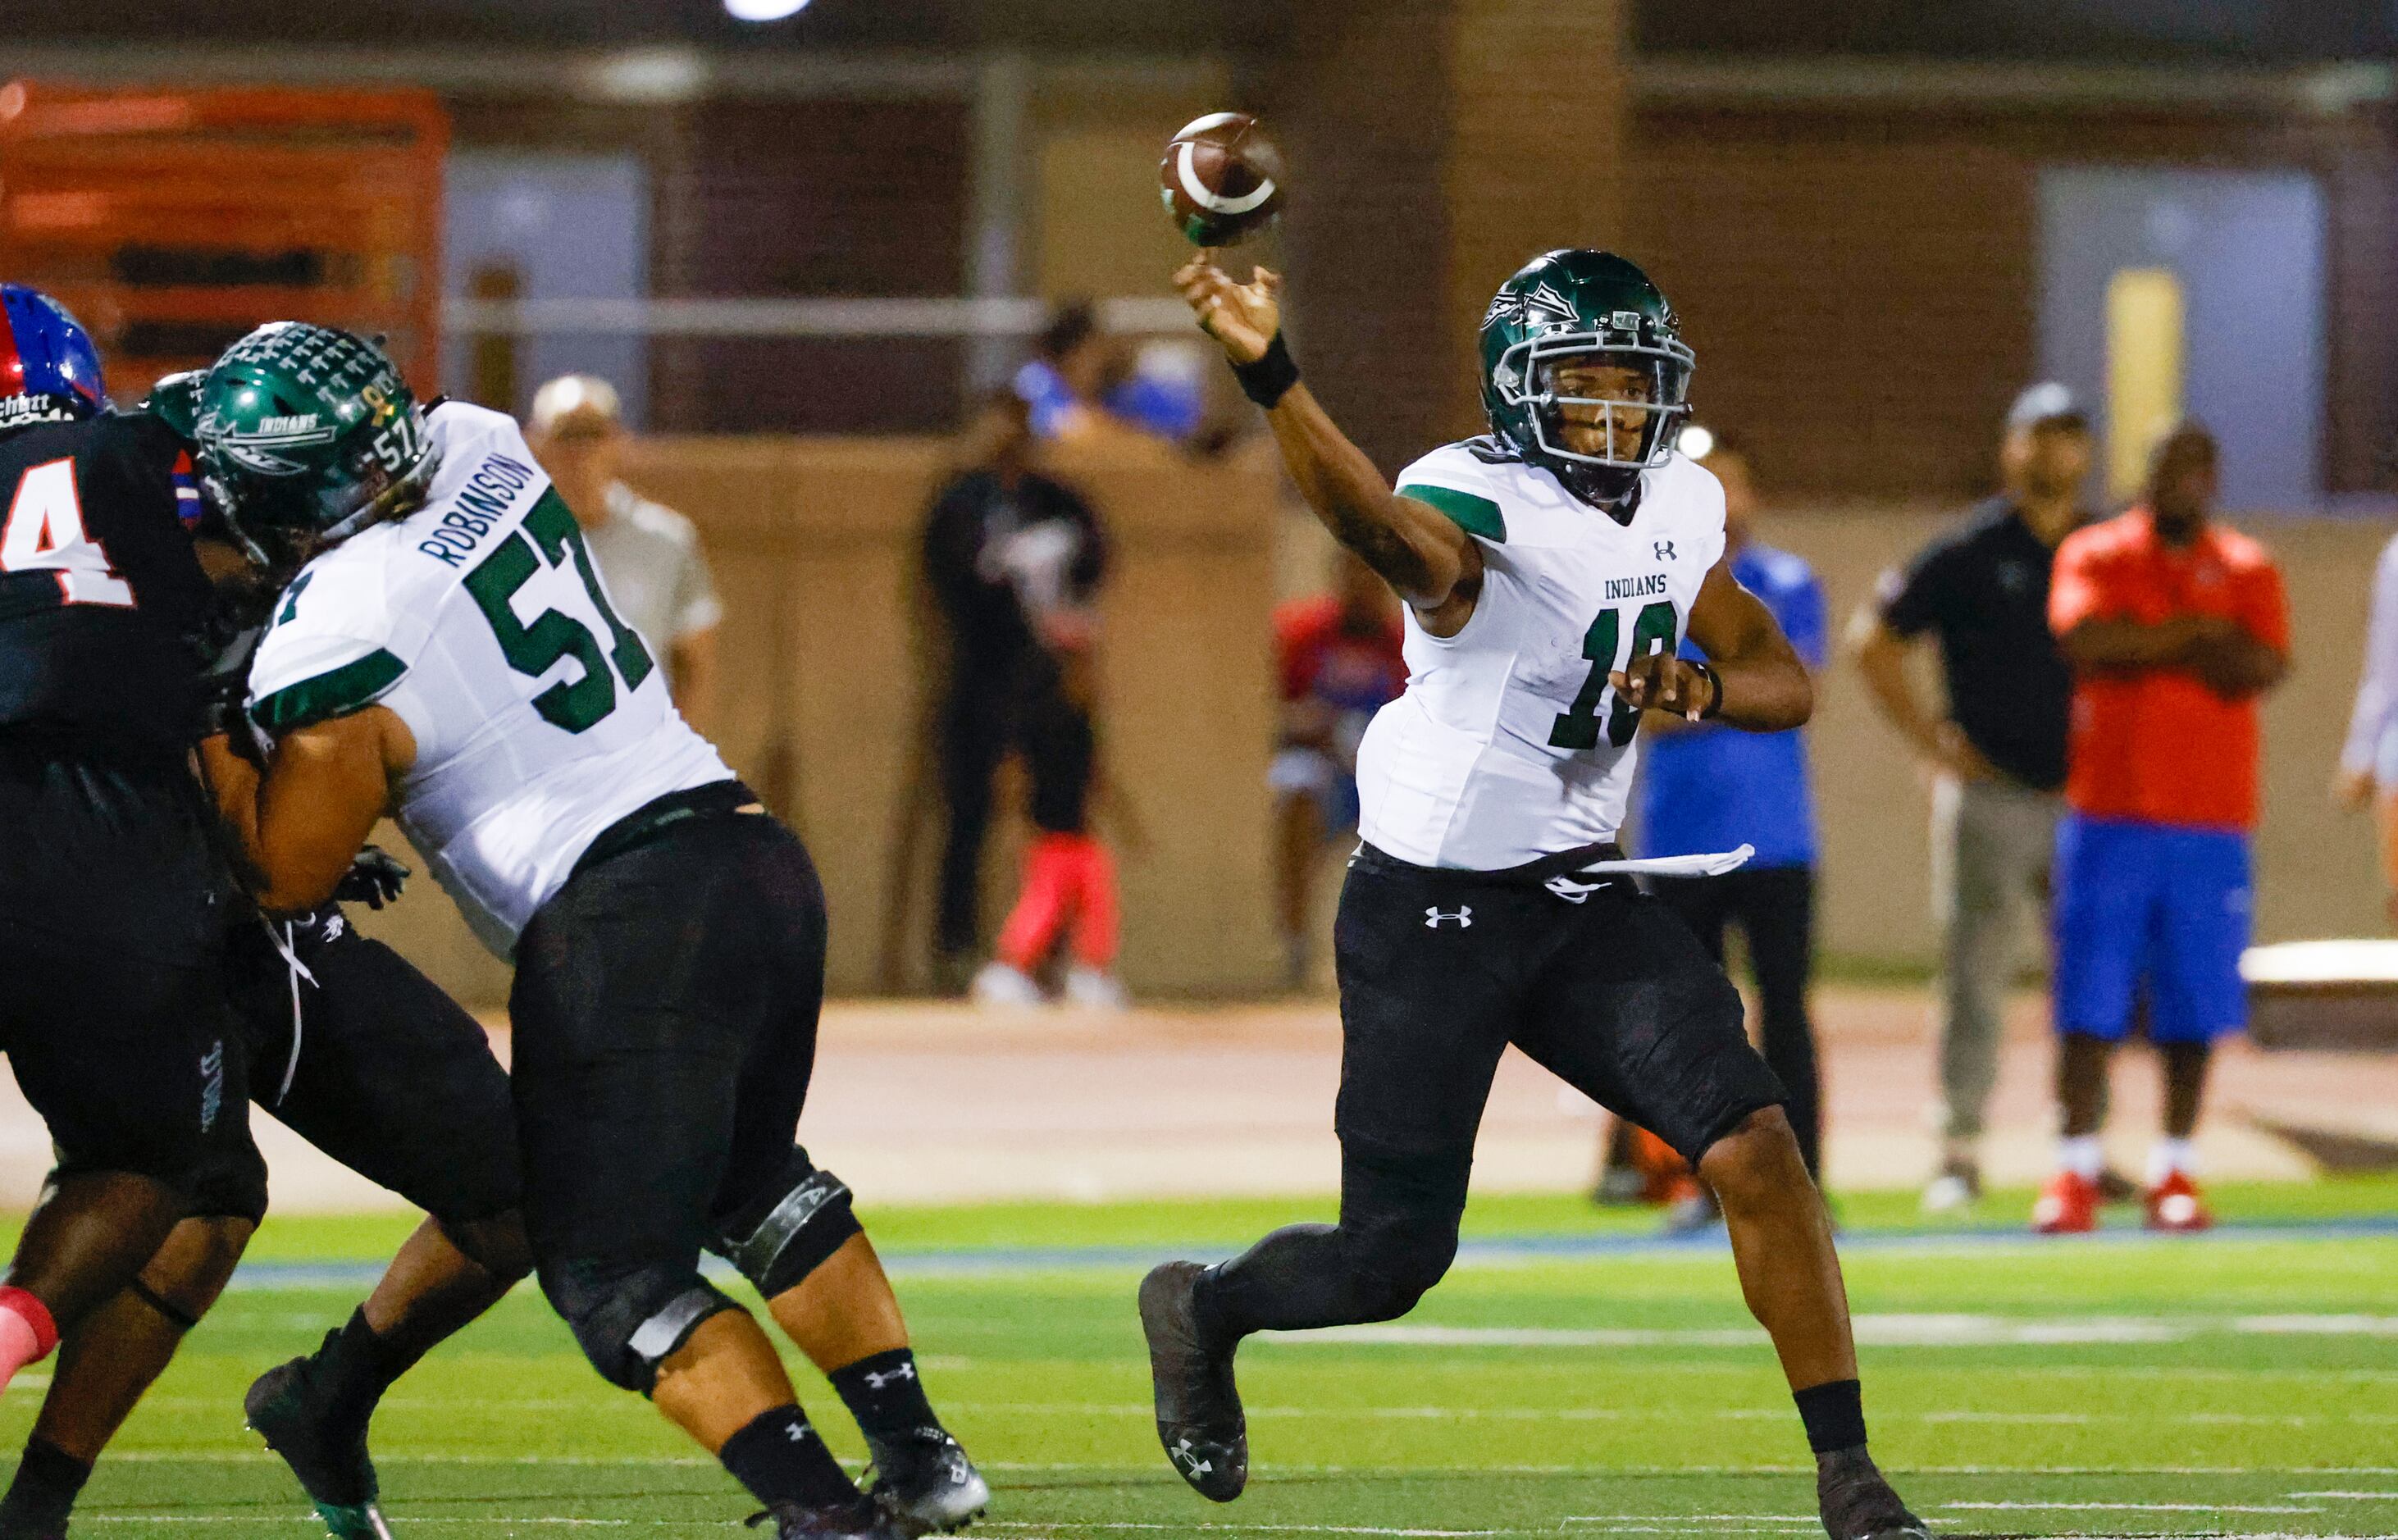 Waxahachie quarter back Roderick Hartsfield, Jr. (10) moves around defenders to throw a pass...